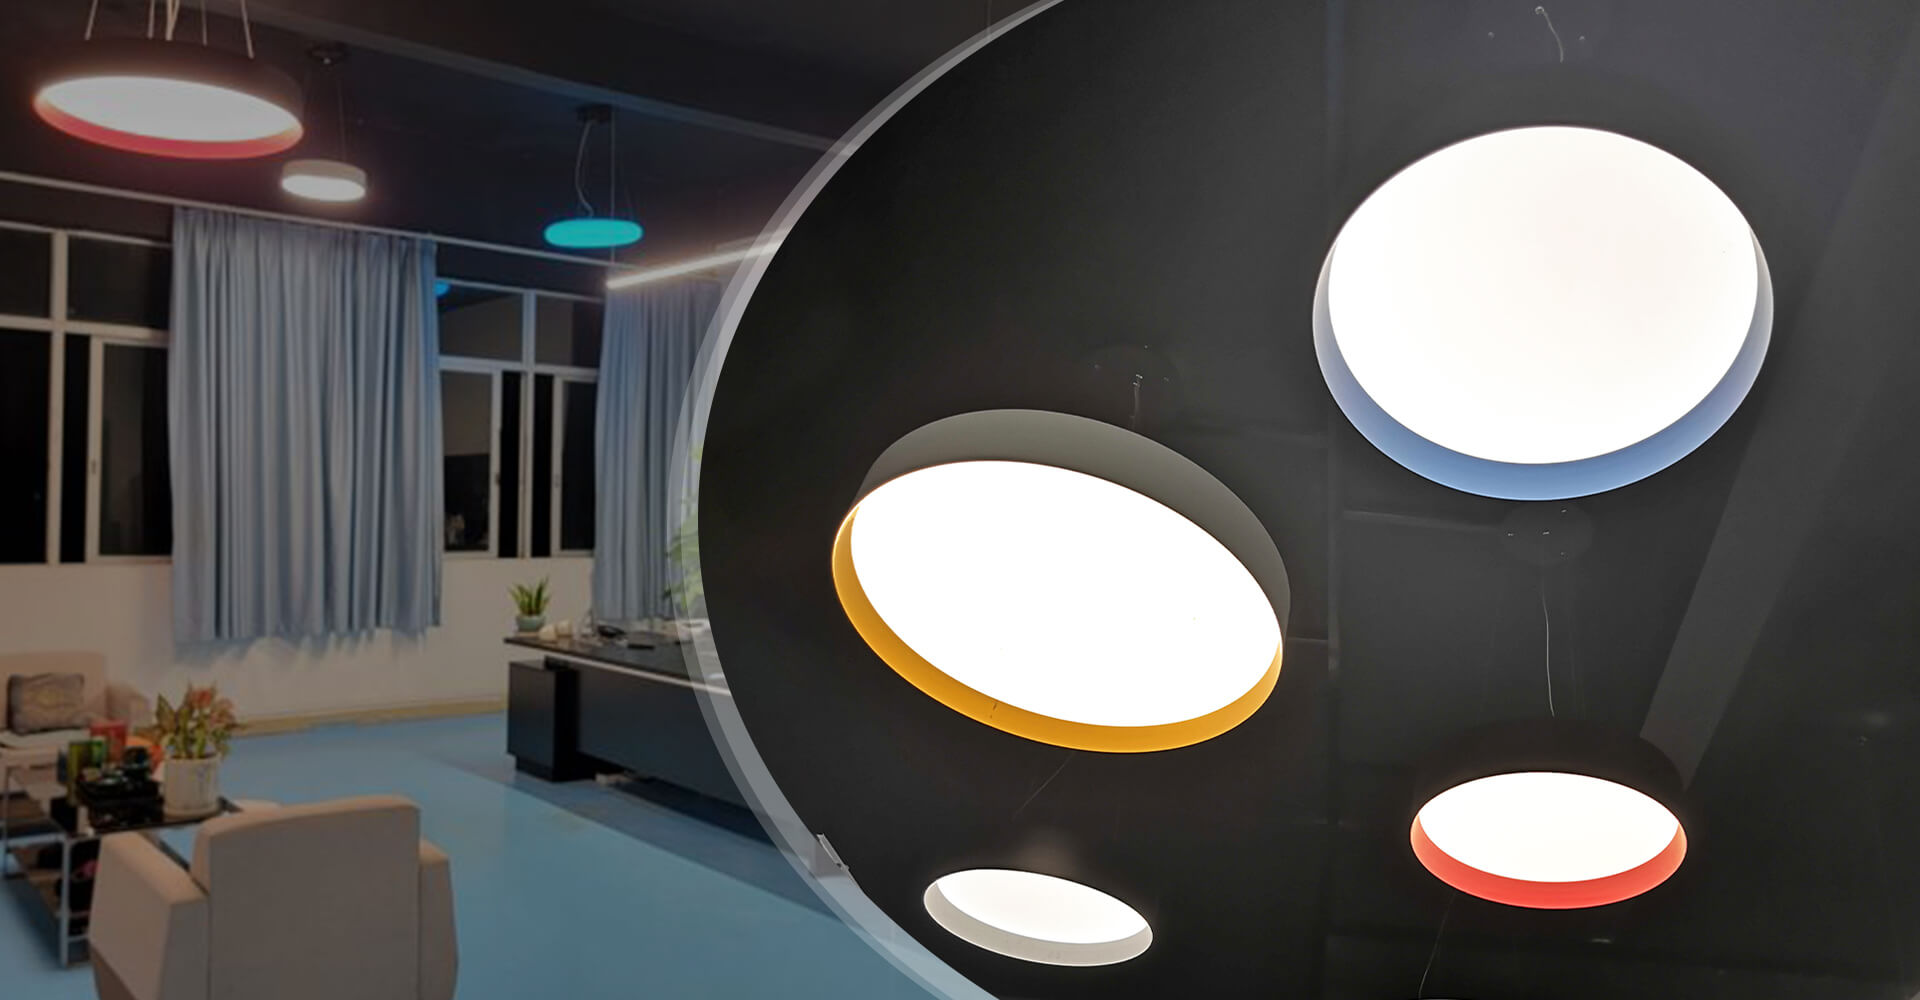 New Shine Lighting round ceiling mounted luminaires with two-color design